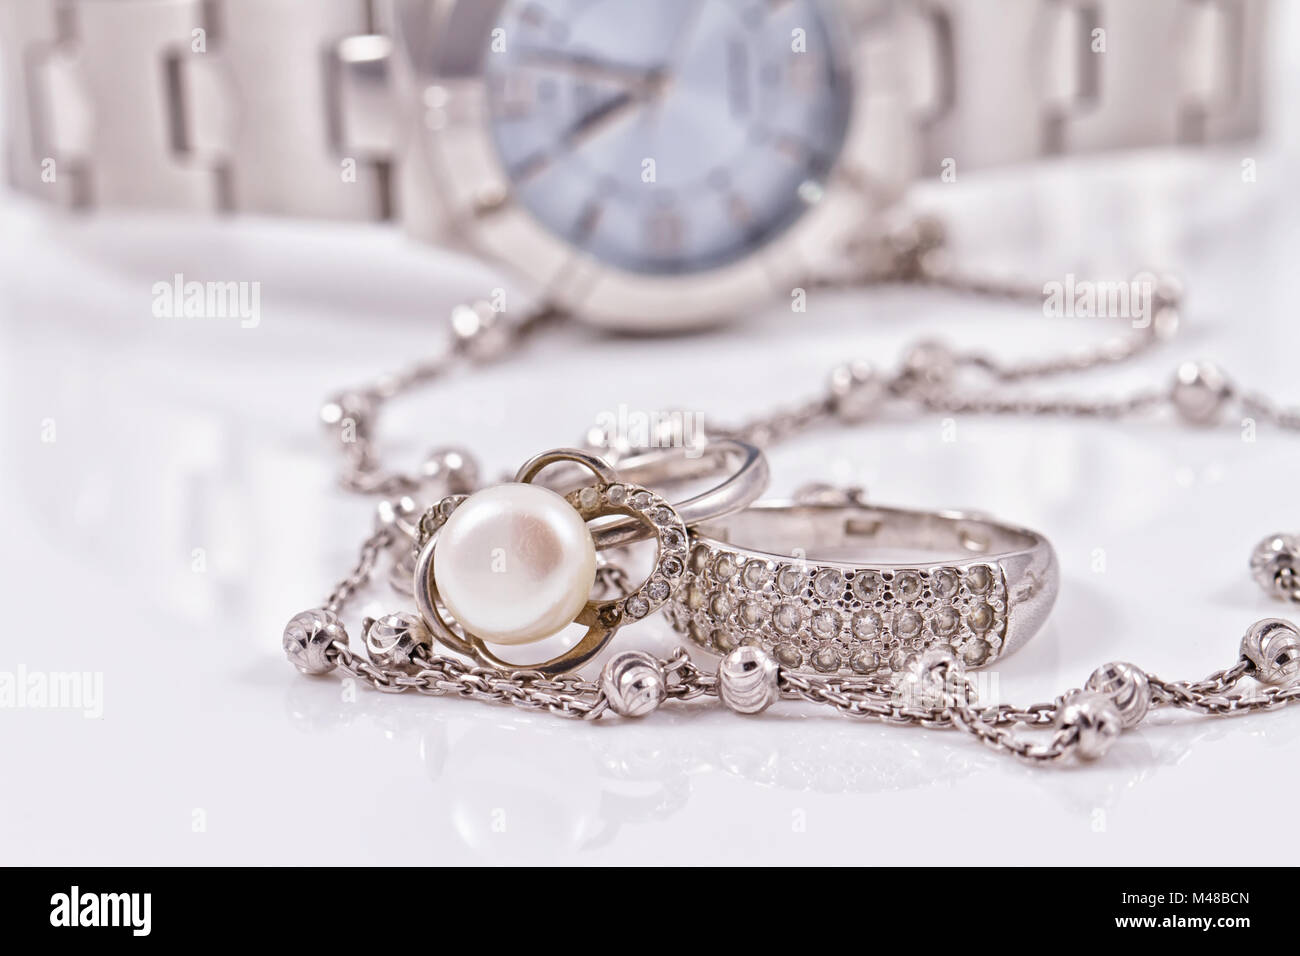 Silver ring and chain on the background of watches Stock Photo